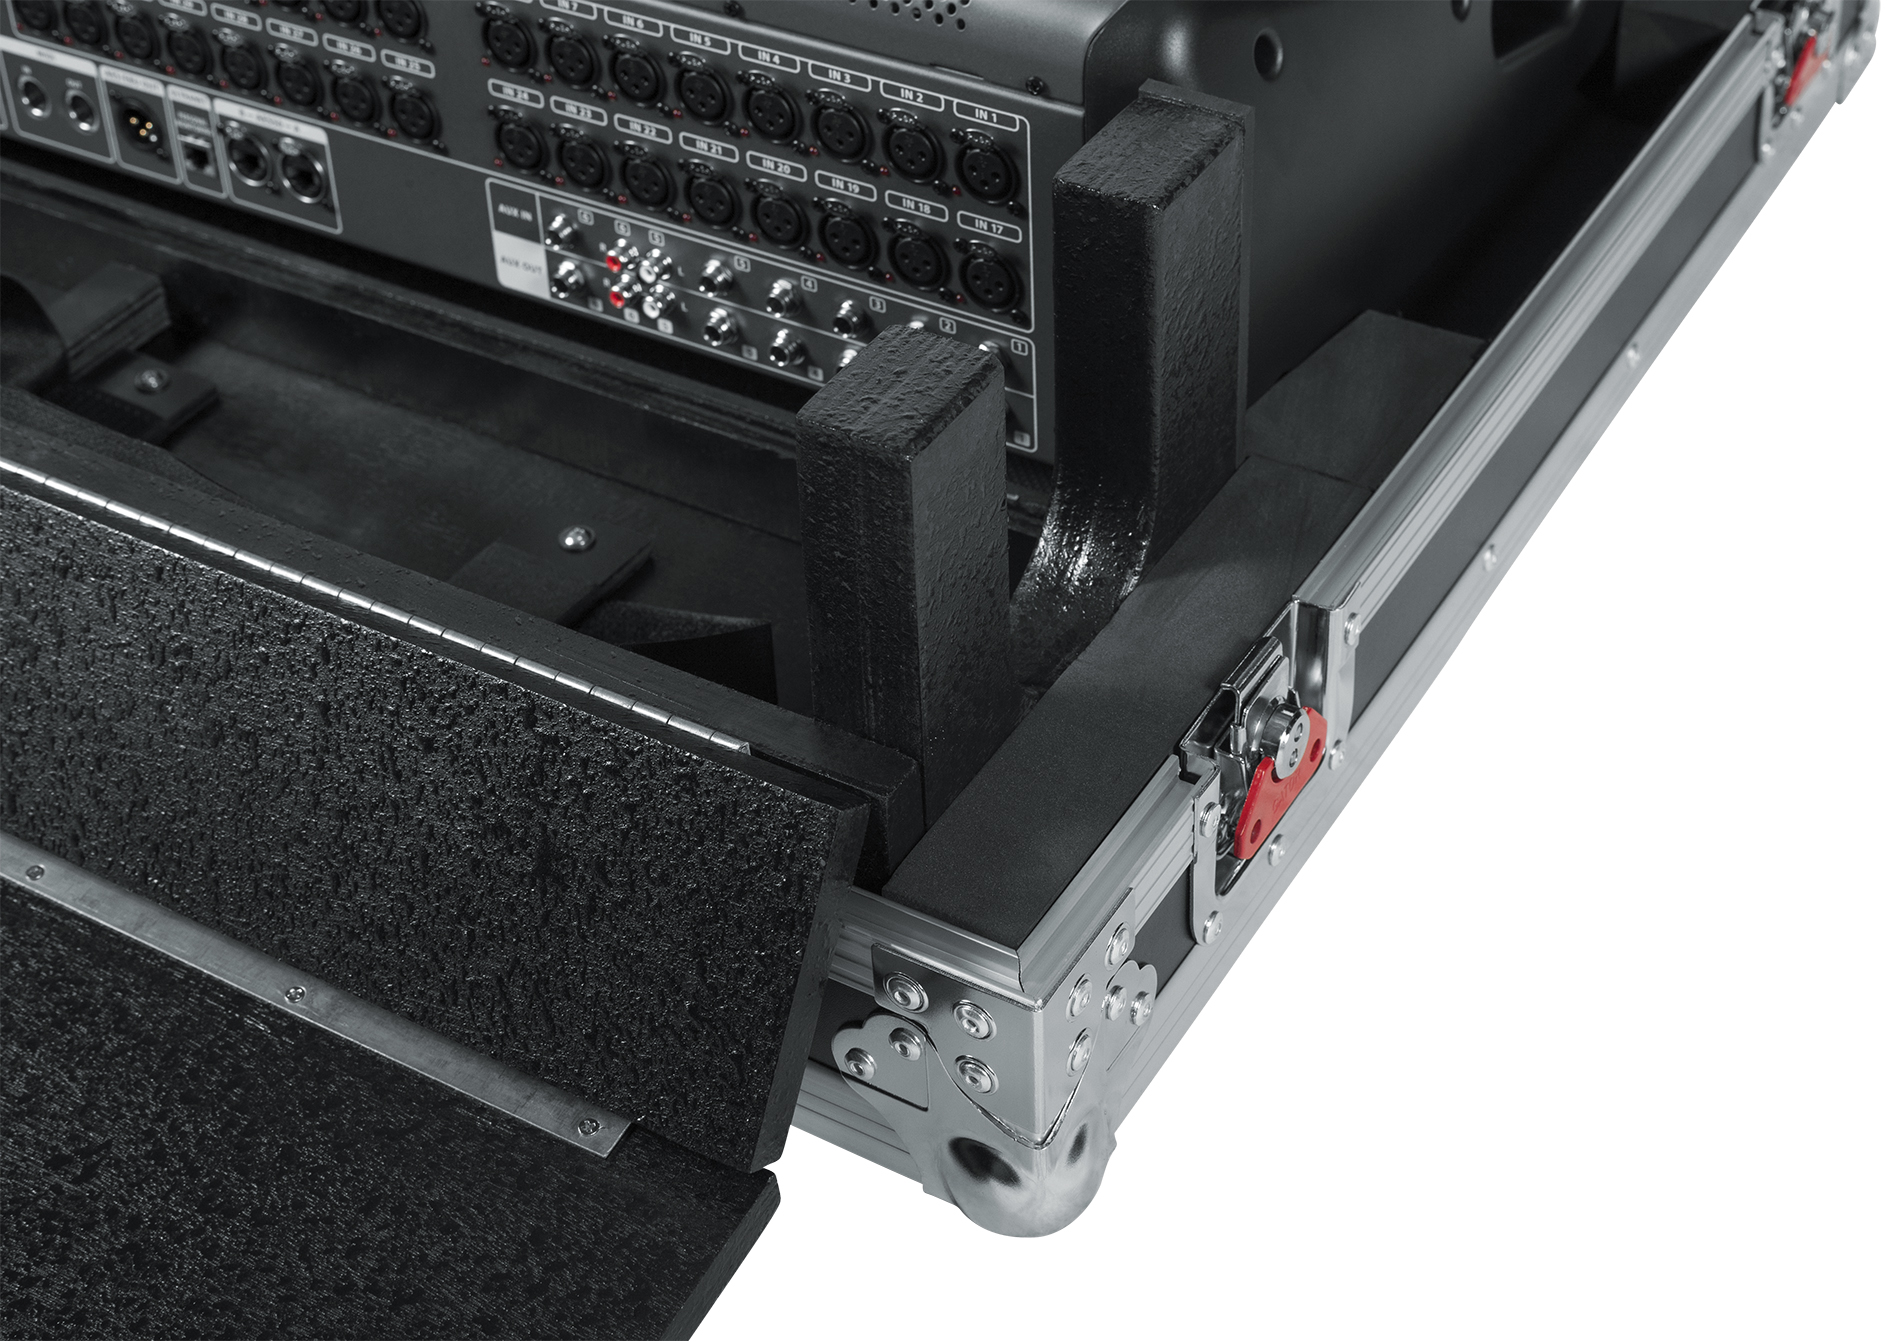 STRC-X32COMP | ATA Plywood Mixer Case with Interior Foam Protection, for  Behringer X32 Compact Digital Mixer